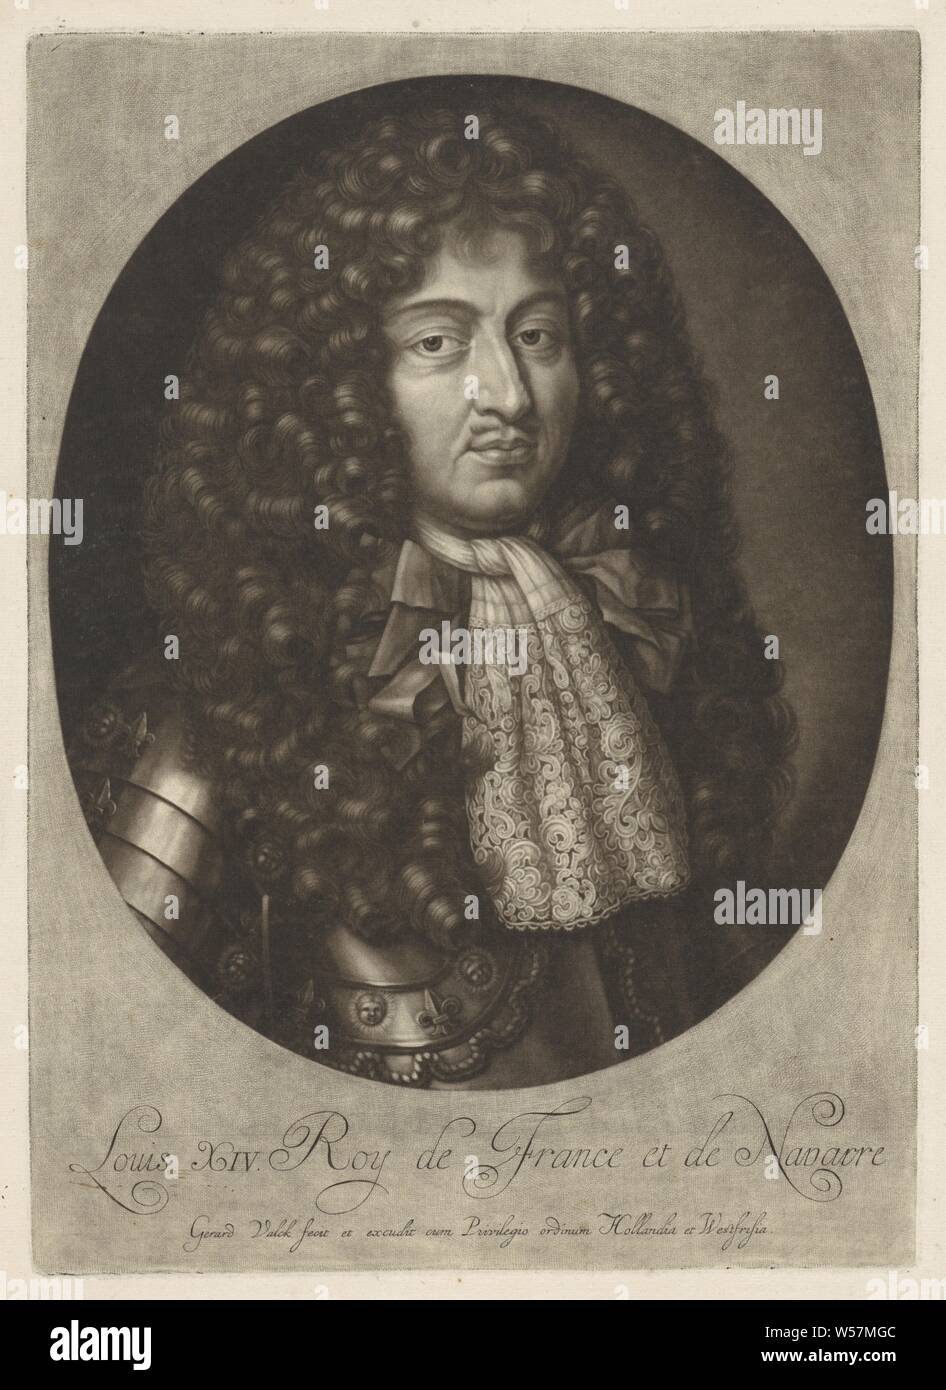 Portrait of Louis XIV, King of France, Louis XIV, King of France. He wears armor decorated with French lilies, wedge, armor, fleur-de-lis, ornament, Louis XIV (King of France), Gerard Valck (mentioned on object), Amsterdam, 1662 - 1726, paper, h 350 mm × w 252 mm Stock Photo